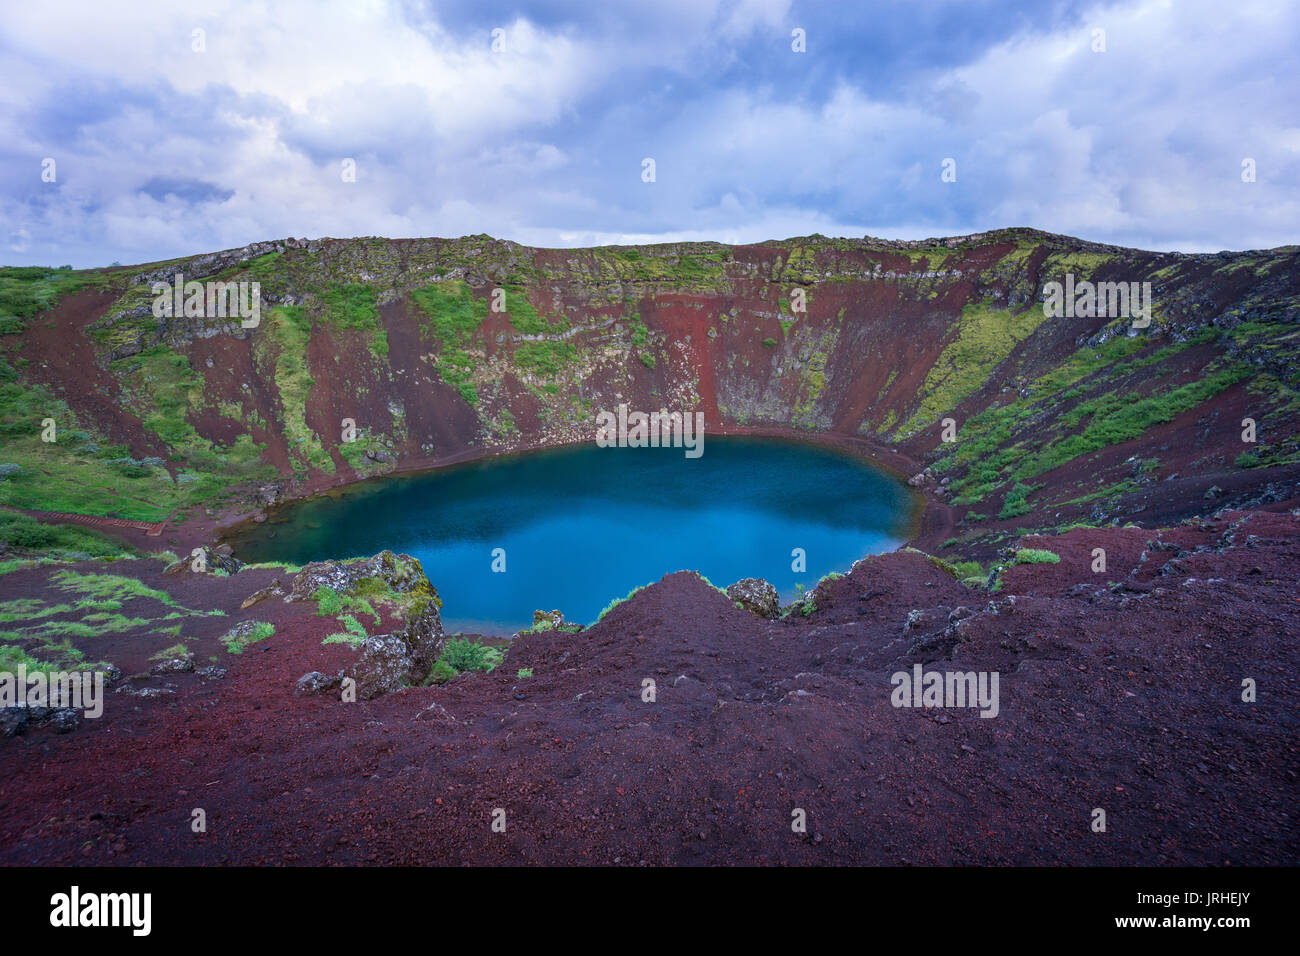 Iceland - Magical moment at Kerid Crater Lake with red stones Stock Photo